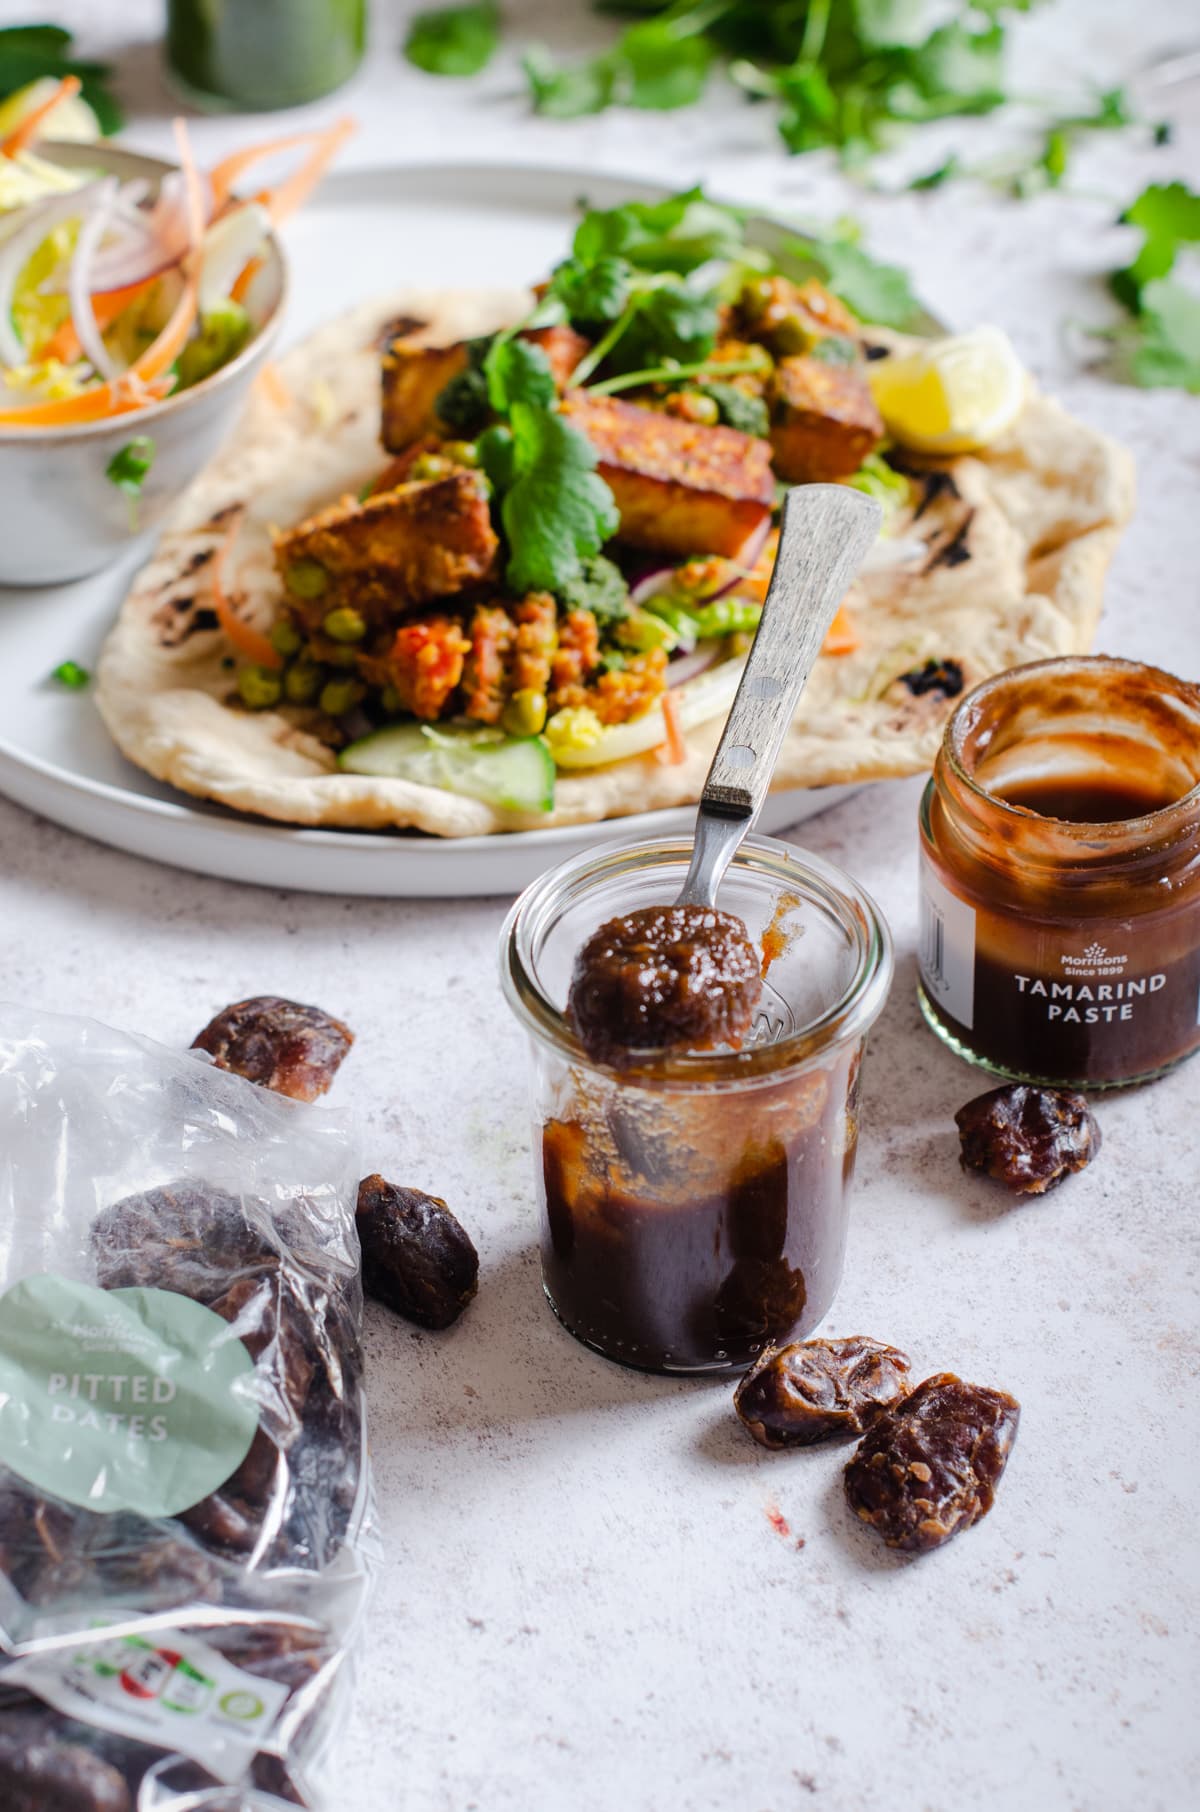 Date ad tamarind chutney as part of a curry wrap.